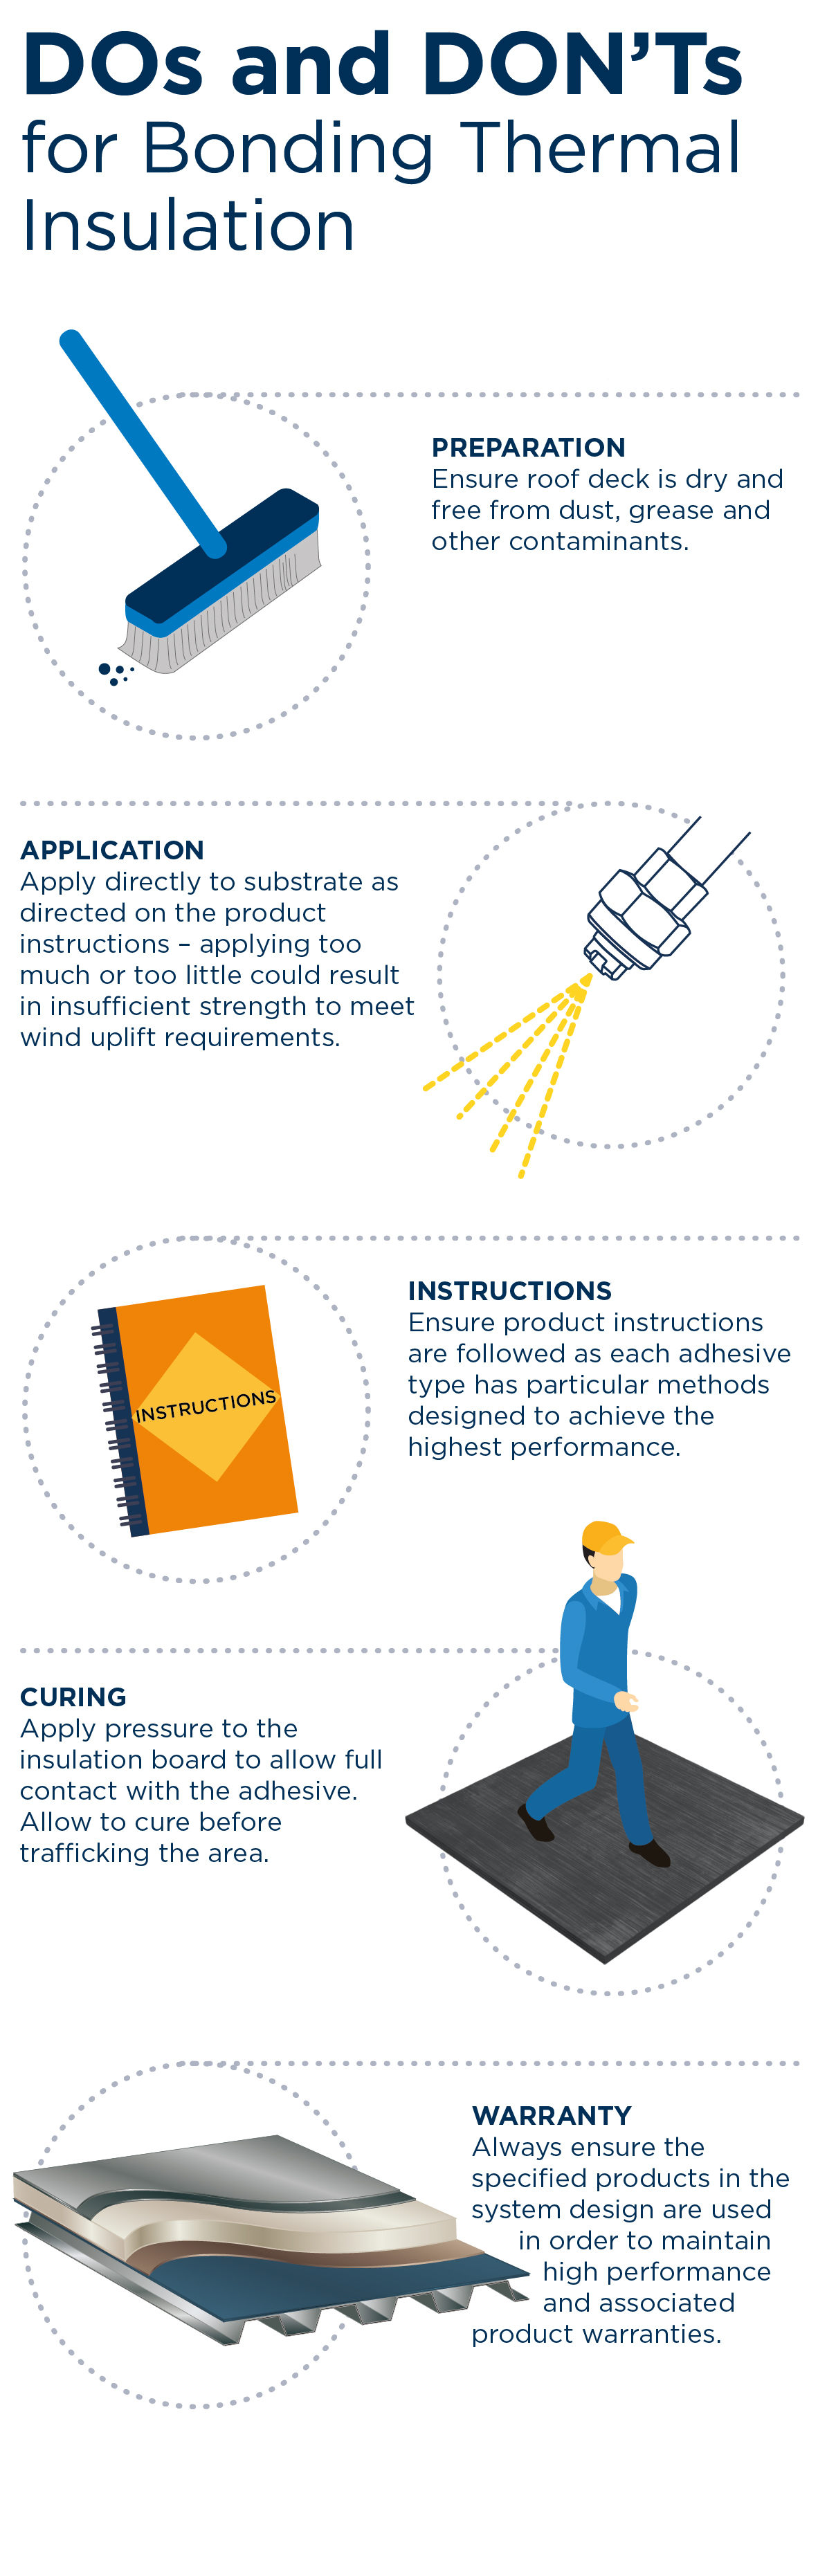 Dos and Don'ts for Bonding Thermal Insulation infographic